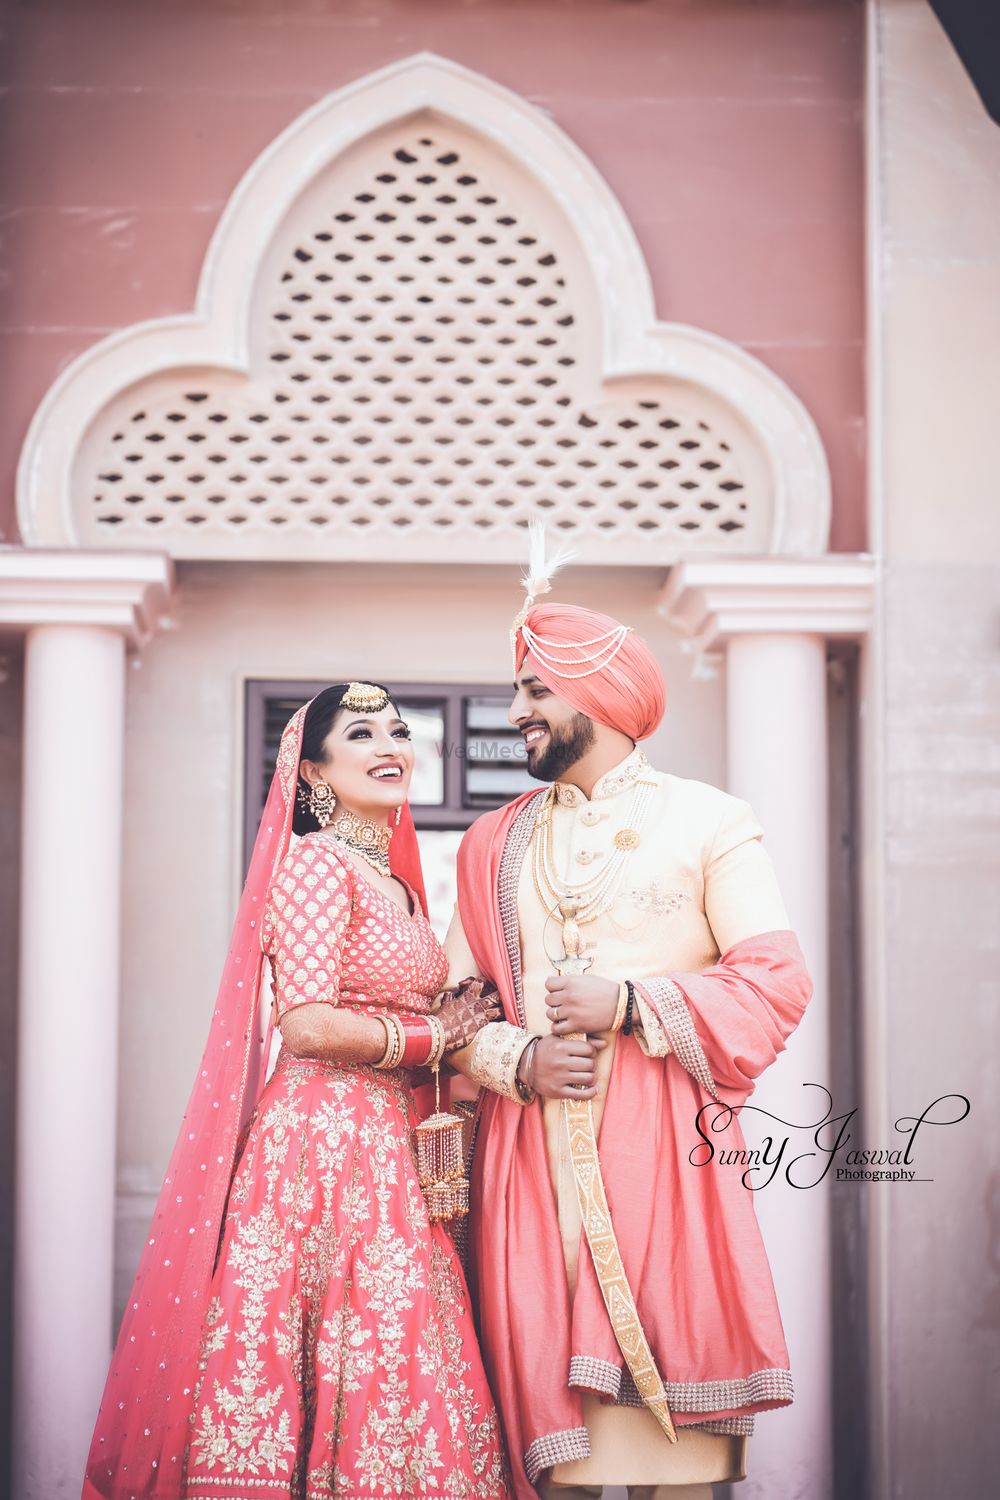 Photo From Sikh Wedding Album - By Sunny Jaswal Photography